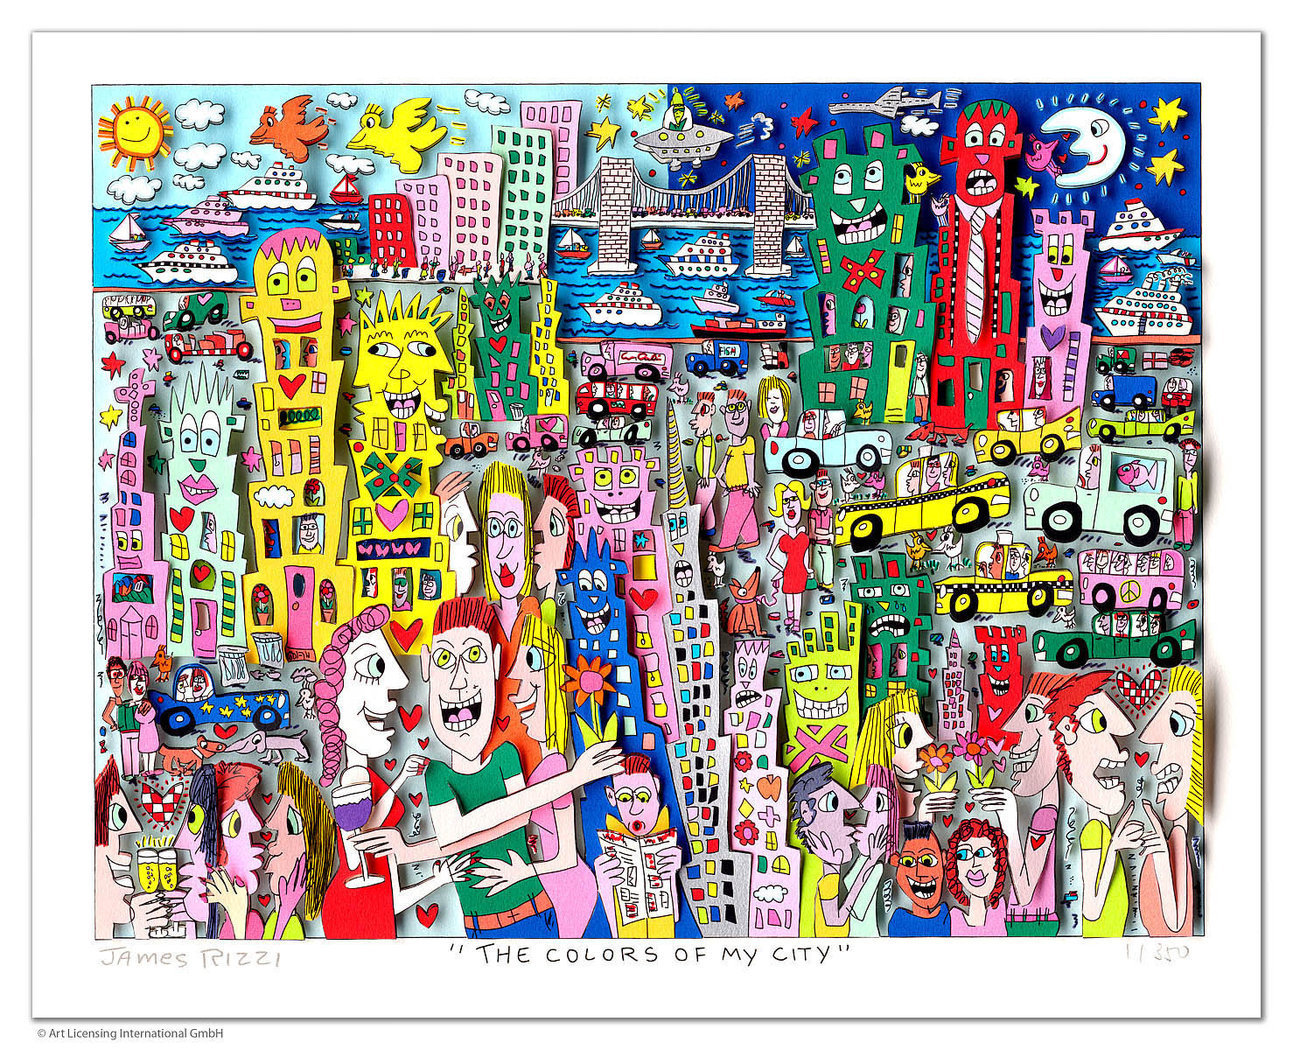 James Rizzi - THE COLORS OF MY CITY